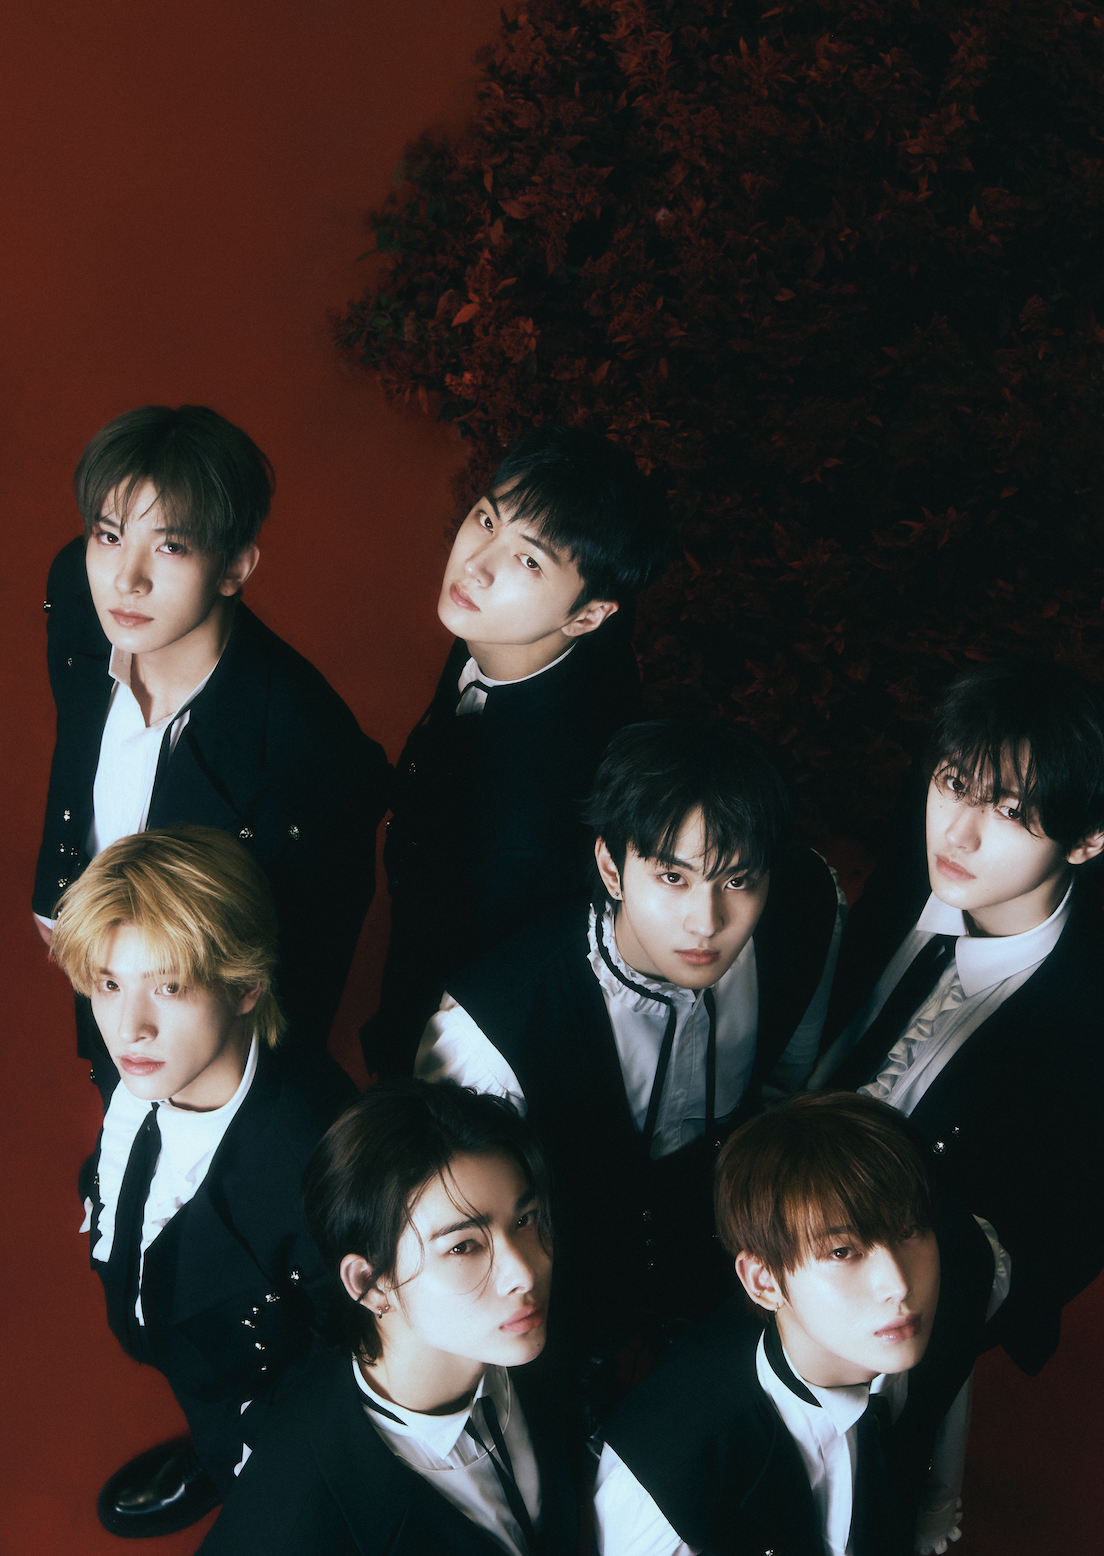 K-pop group Enhypen posing for their album Dark Blood by looking up at the camera